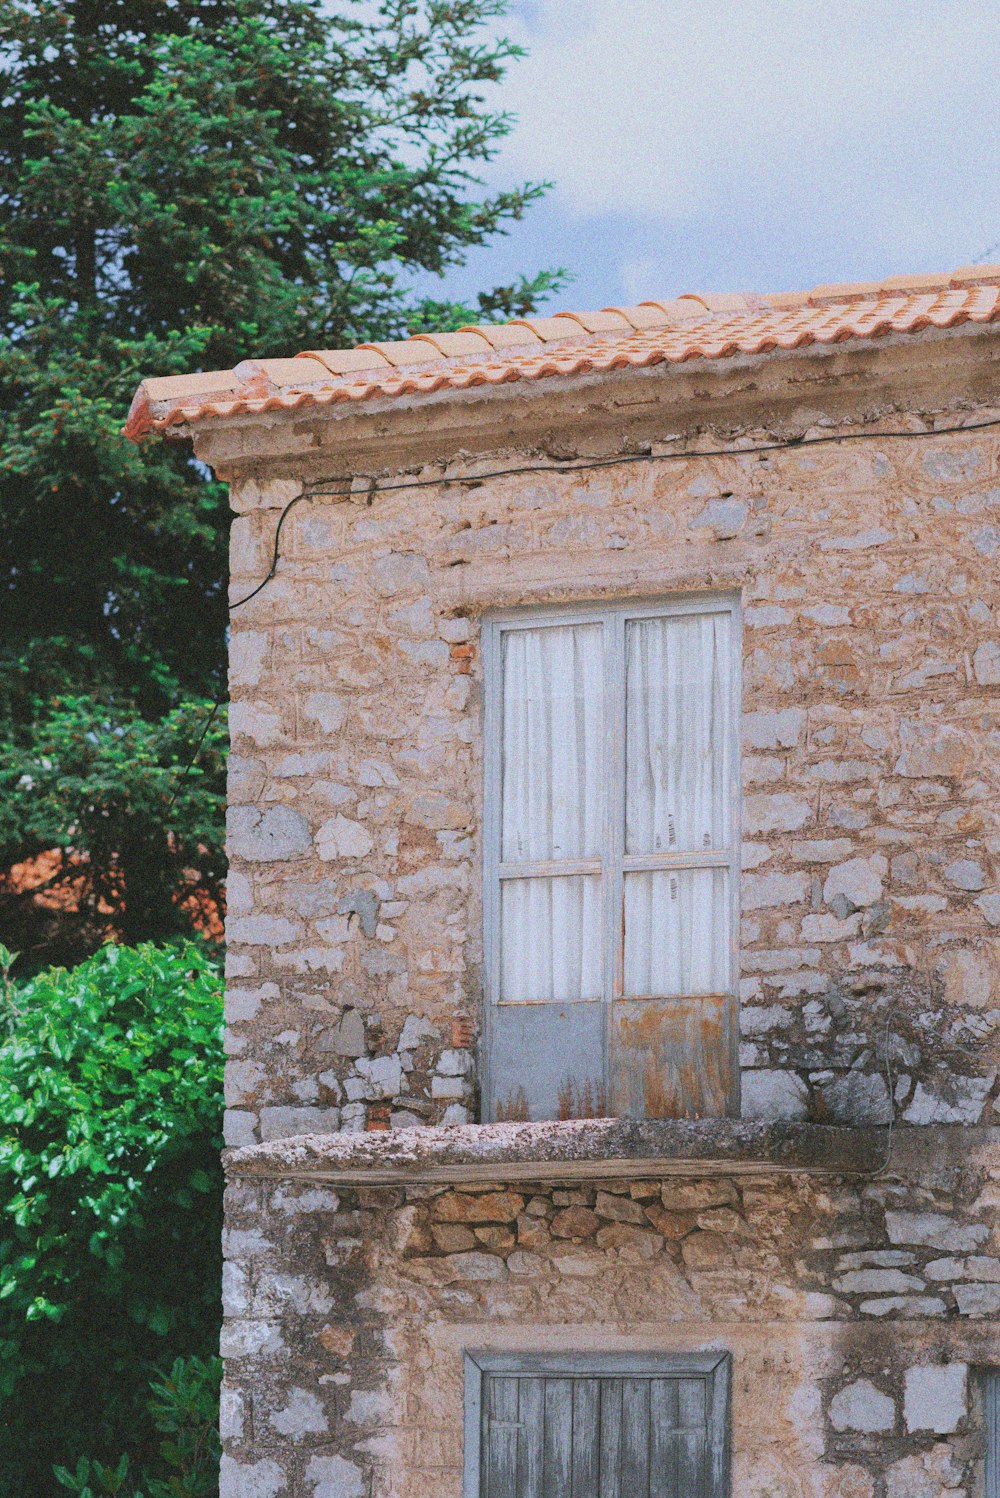 an old brick building with a cat sitting on the window sill